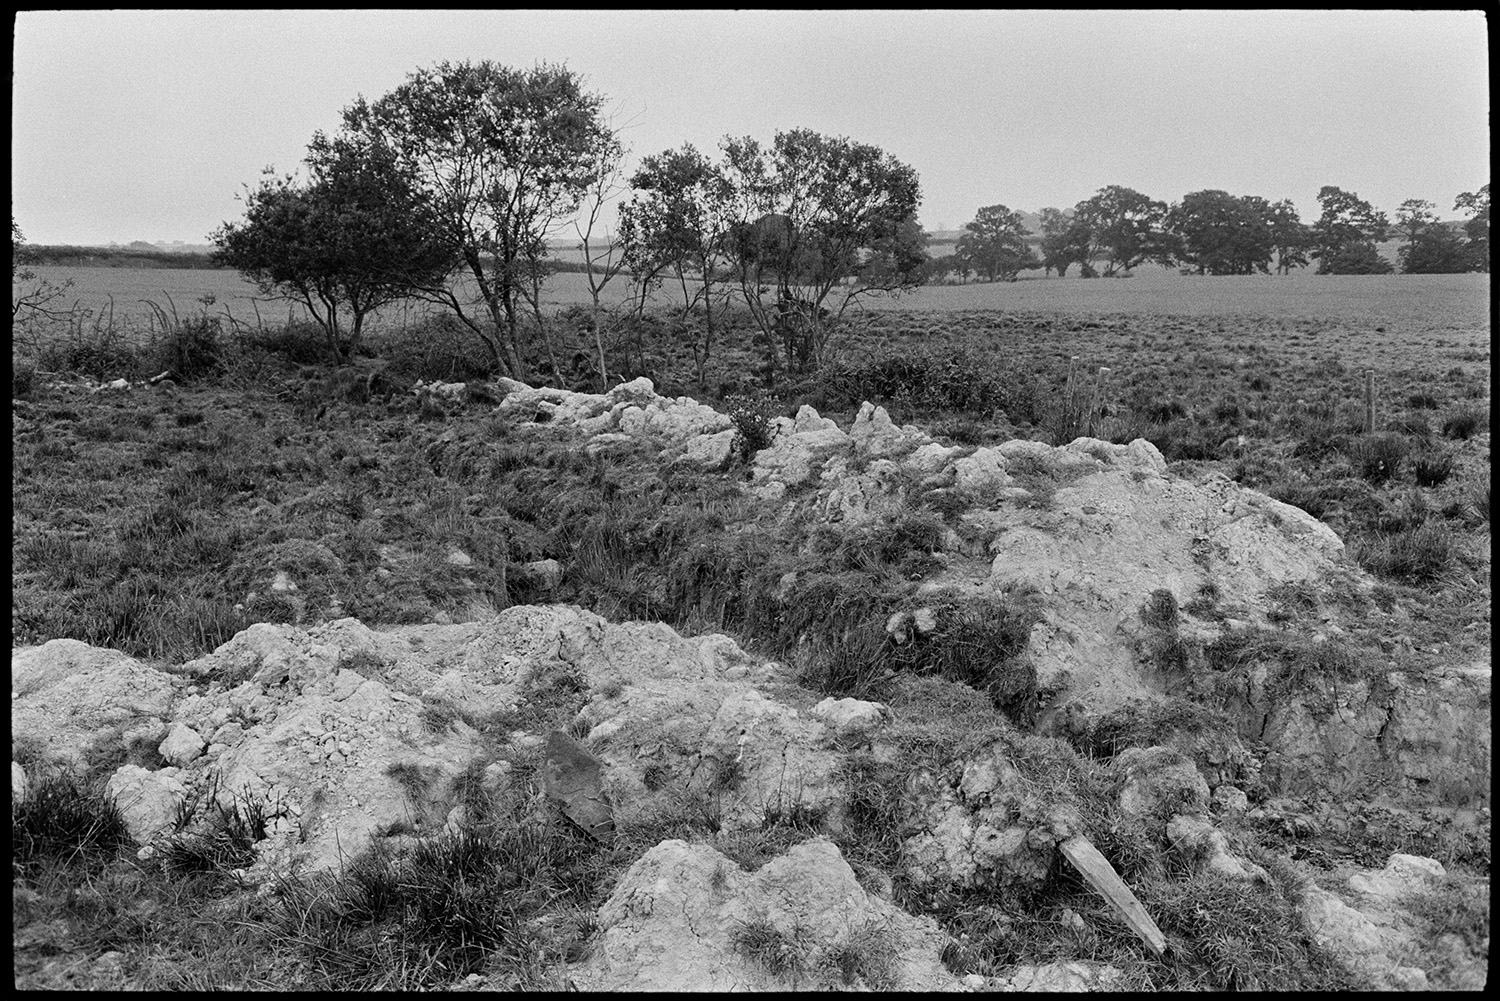 Remains of drainage work on old wetland moor. 
[The remains and rubble of drainage works on moorland at Westacott, Riddlecombe. Trees and fields are visible in the background.]